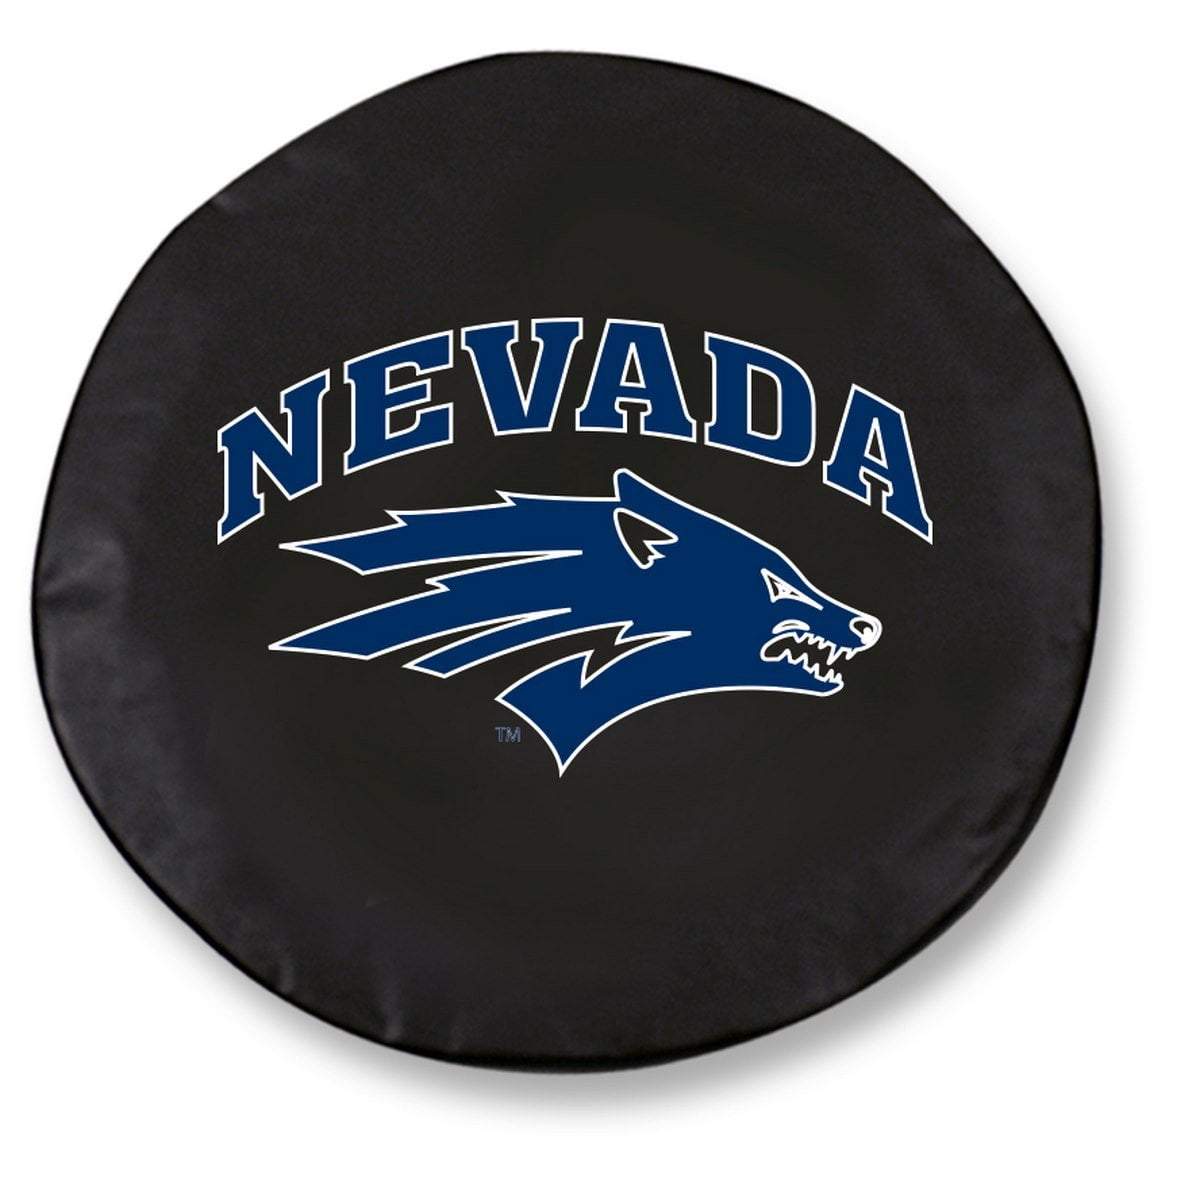 Nevada Wolfpack HBS Black Vinyl Fitted Spare Car Tire Cover Sporting Up